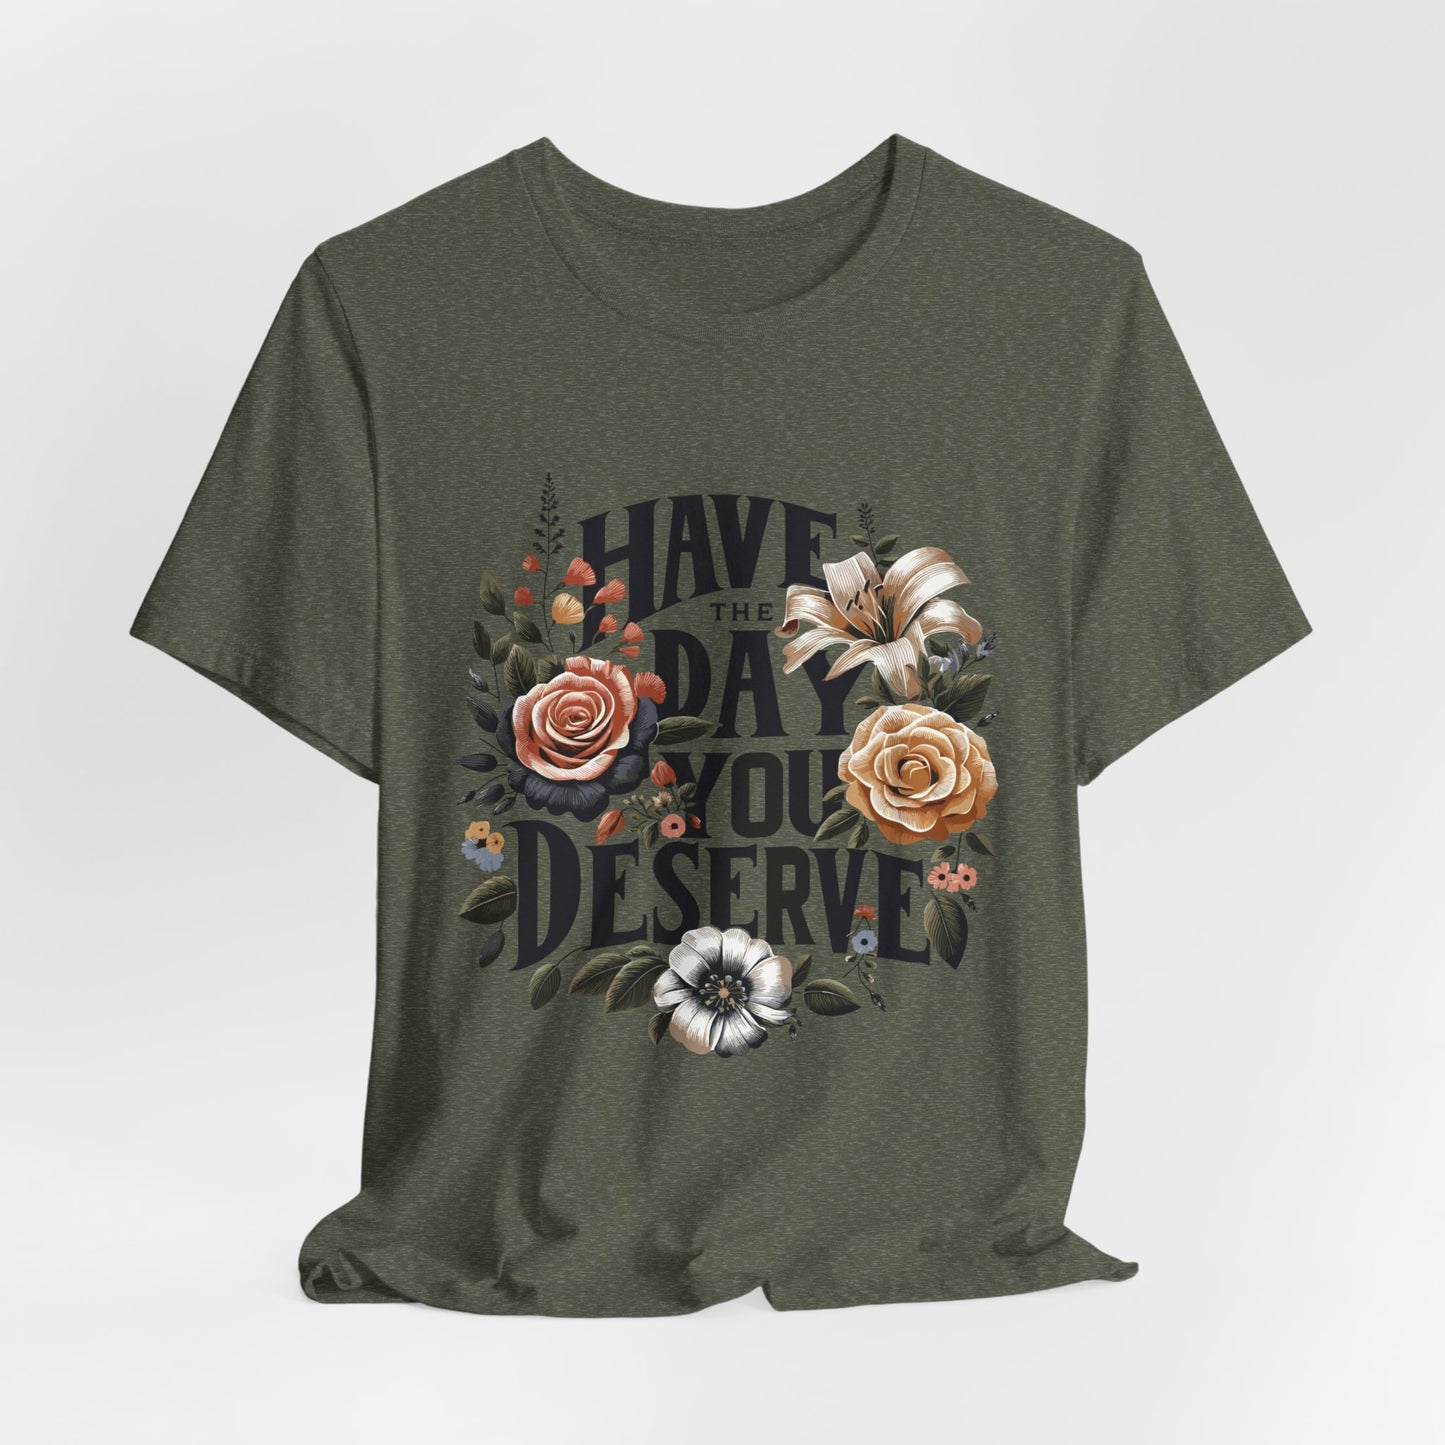 Have The Day You Deserve Women's Short Sleeve Tshirt